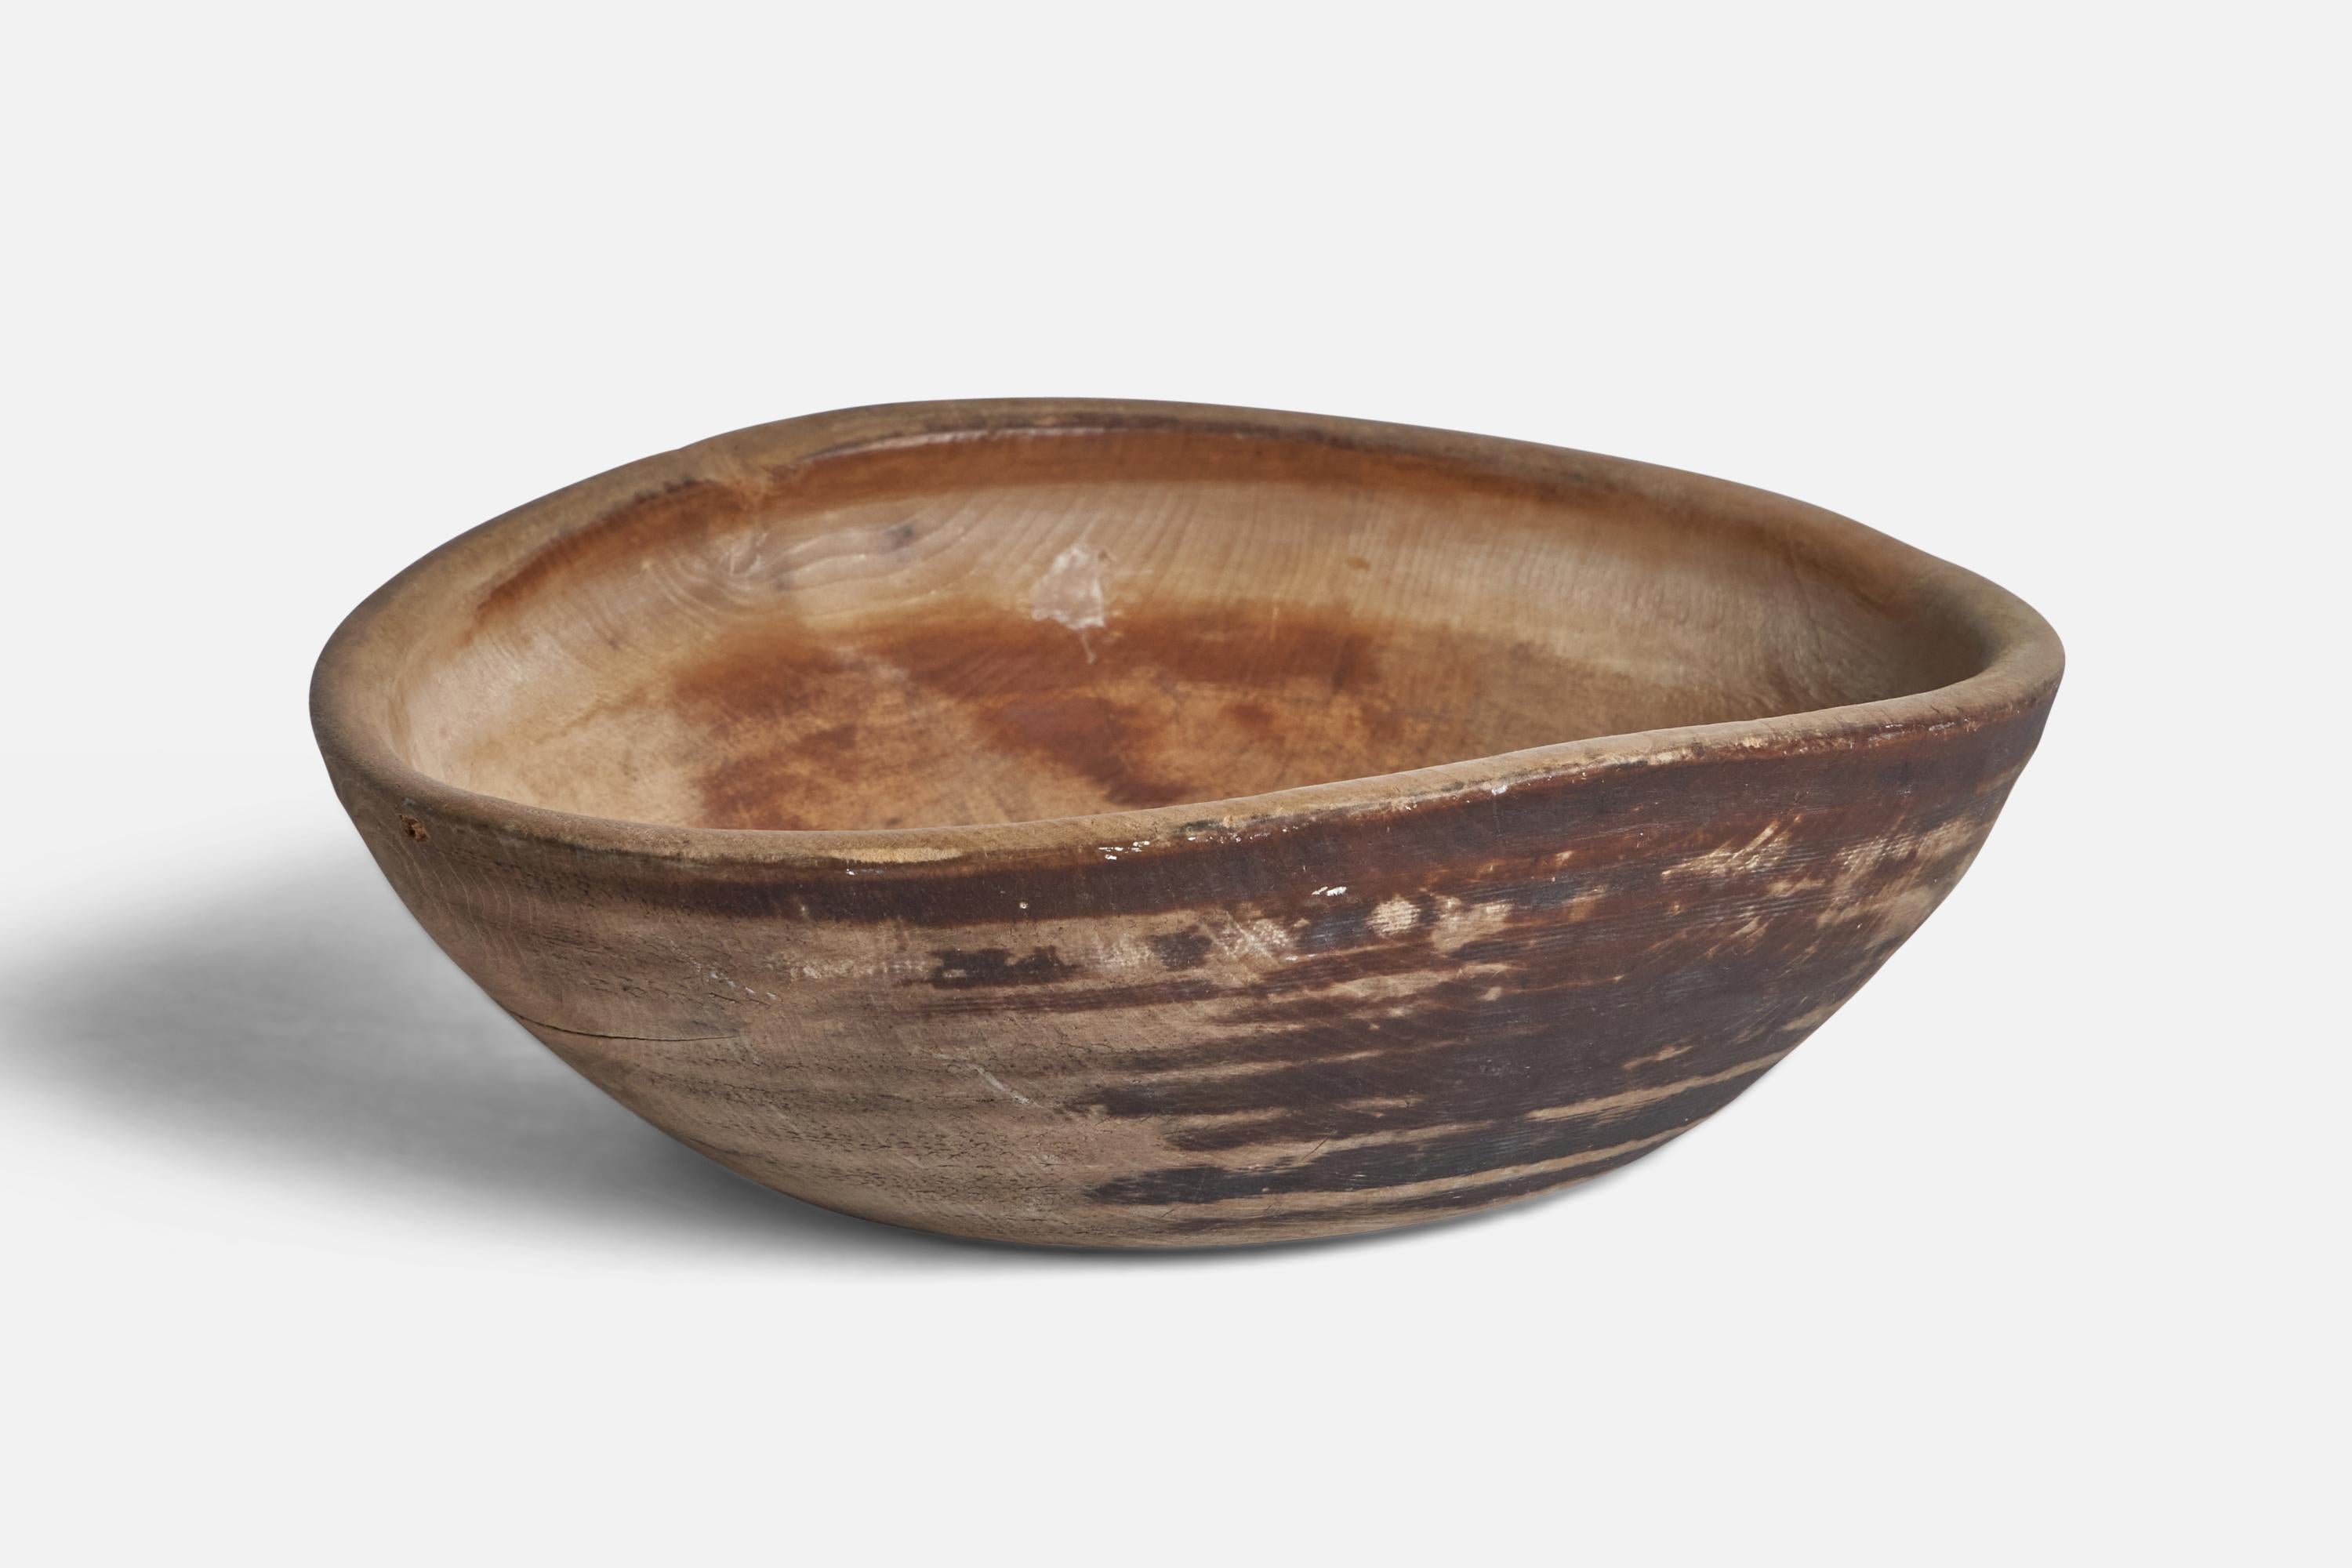 A wooden bowl designed and produced in Sweden, 19th century